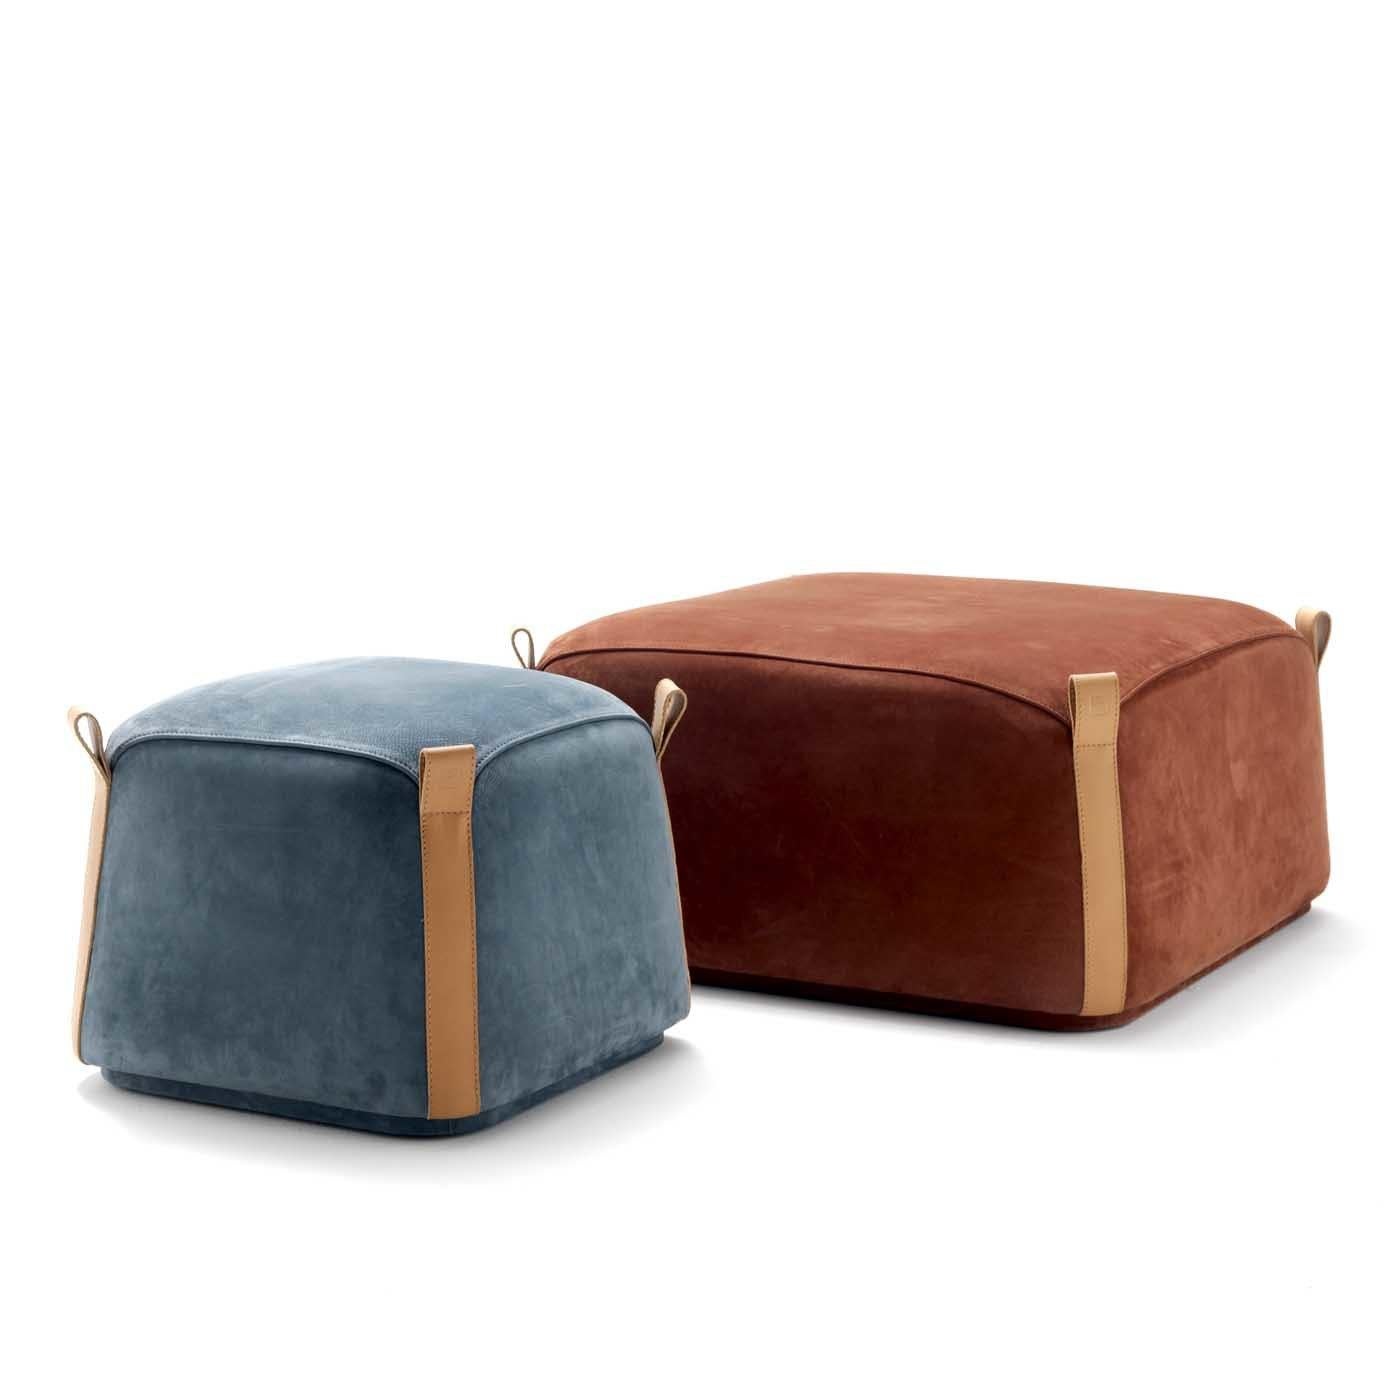 Best showcased alongside the Lilas poufs in different colors, this stunning and versatile object of functional decor will enrich a modern living room or contemporary study, while also offering extra seating or footrest. The plush silhouette is